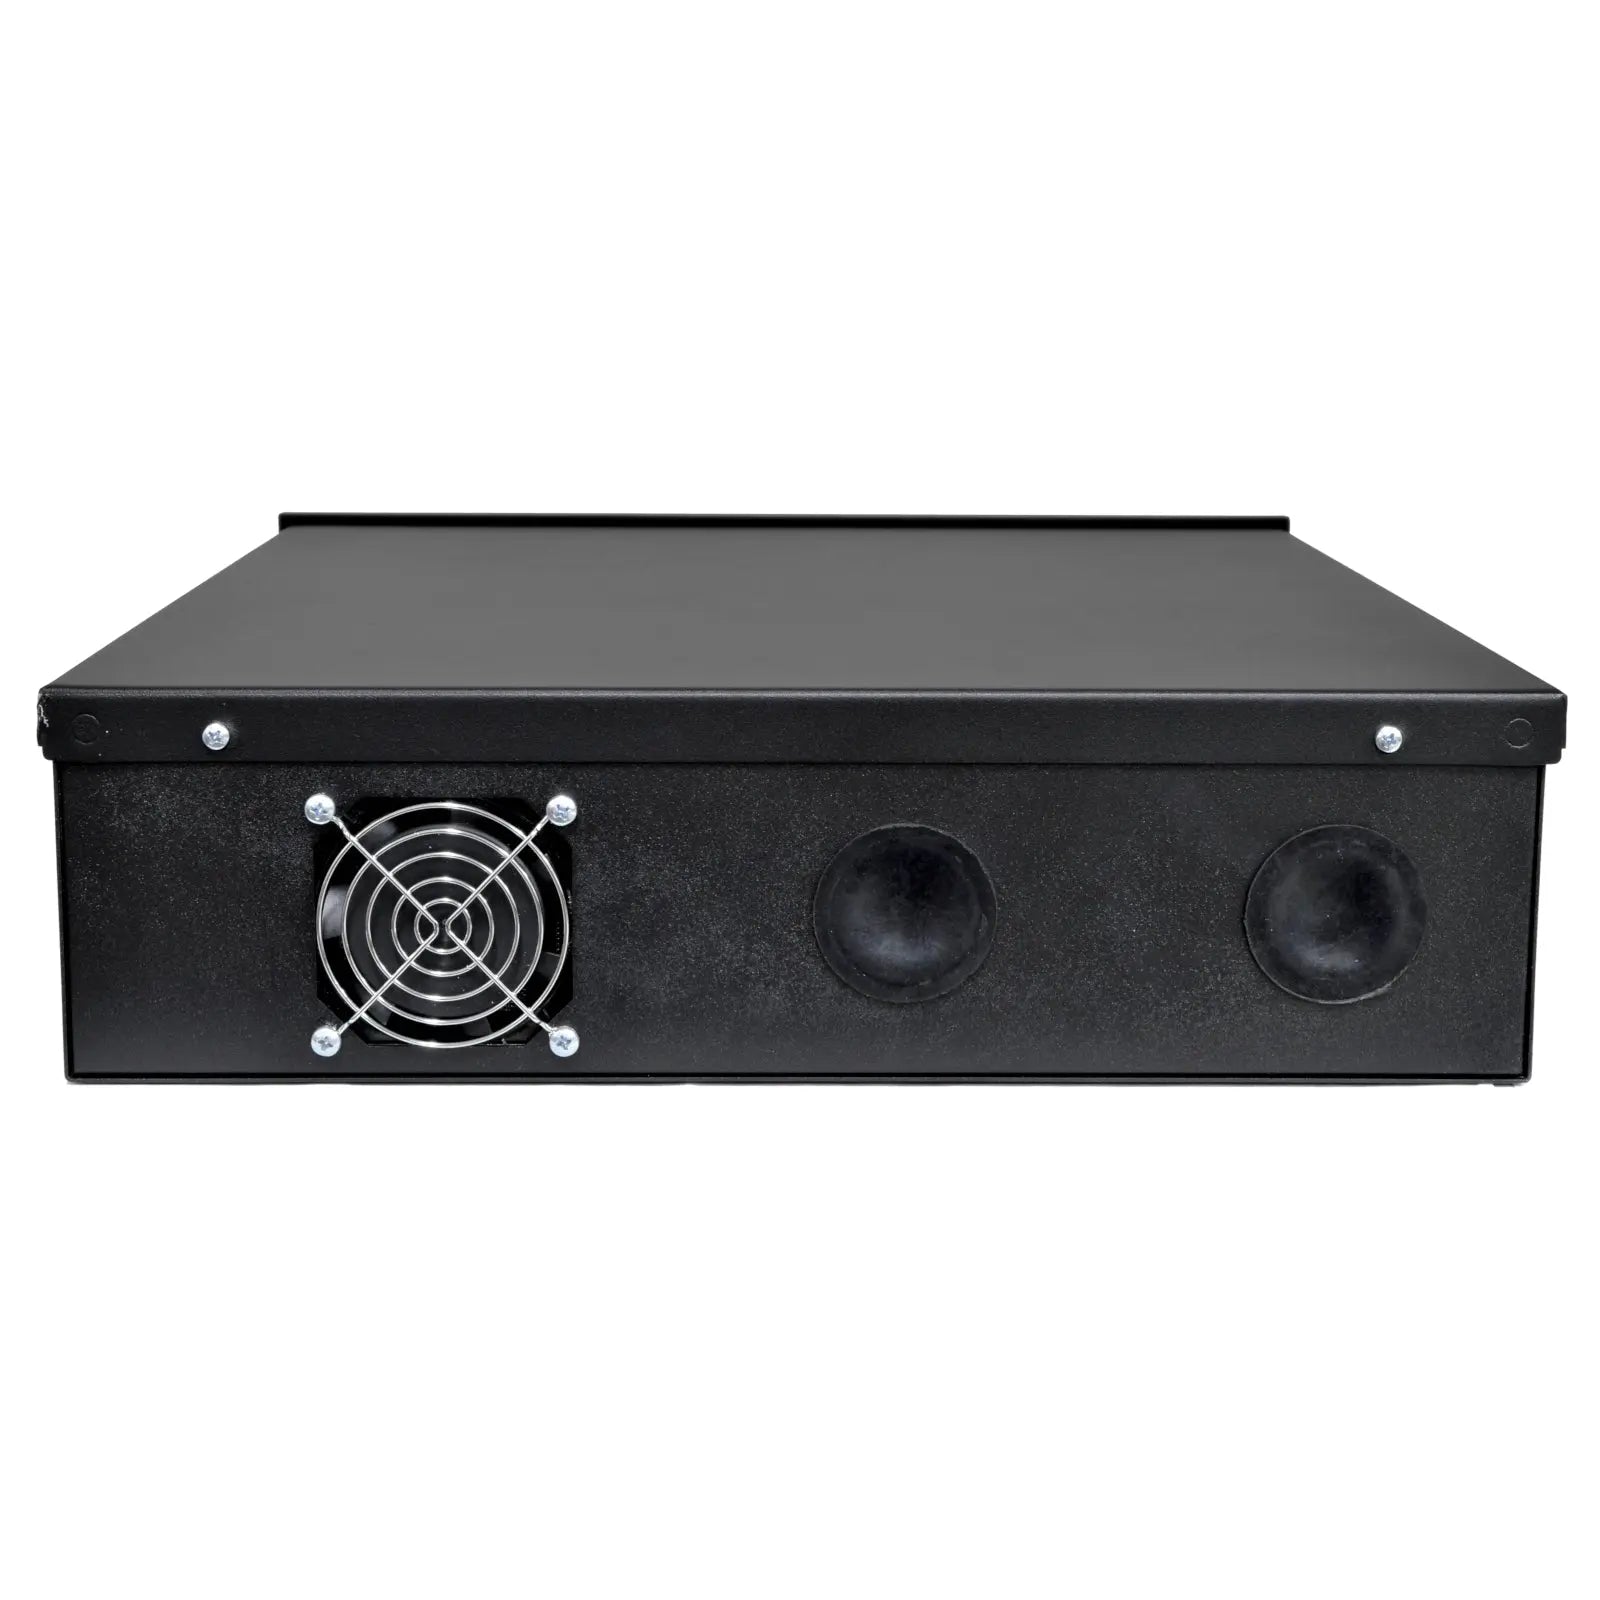 Heavy Duty 18 x 18 x 5 DVR Security Lock Box with Fan for CCTV Security Systems Black White The Wires Zone 1656541709 1600x1600